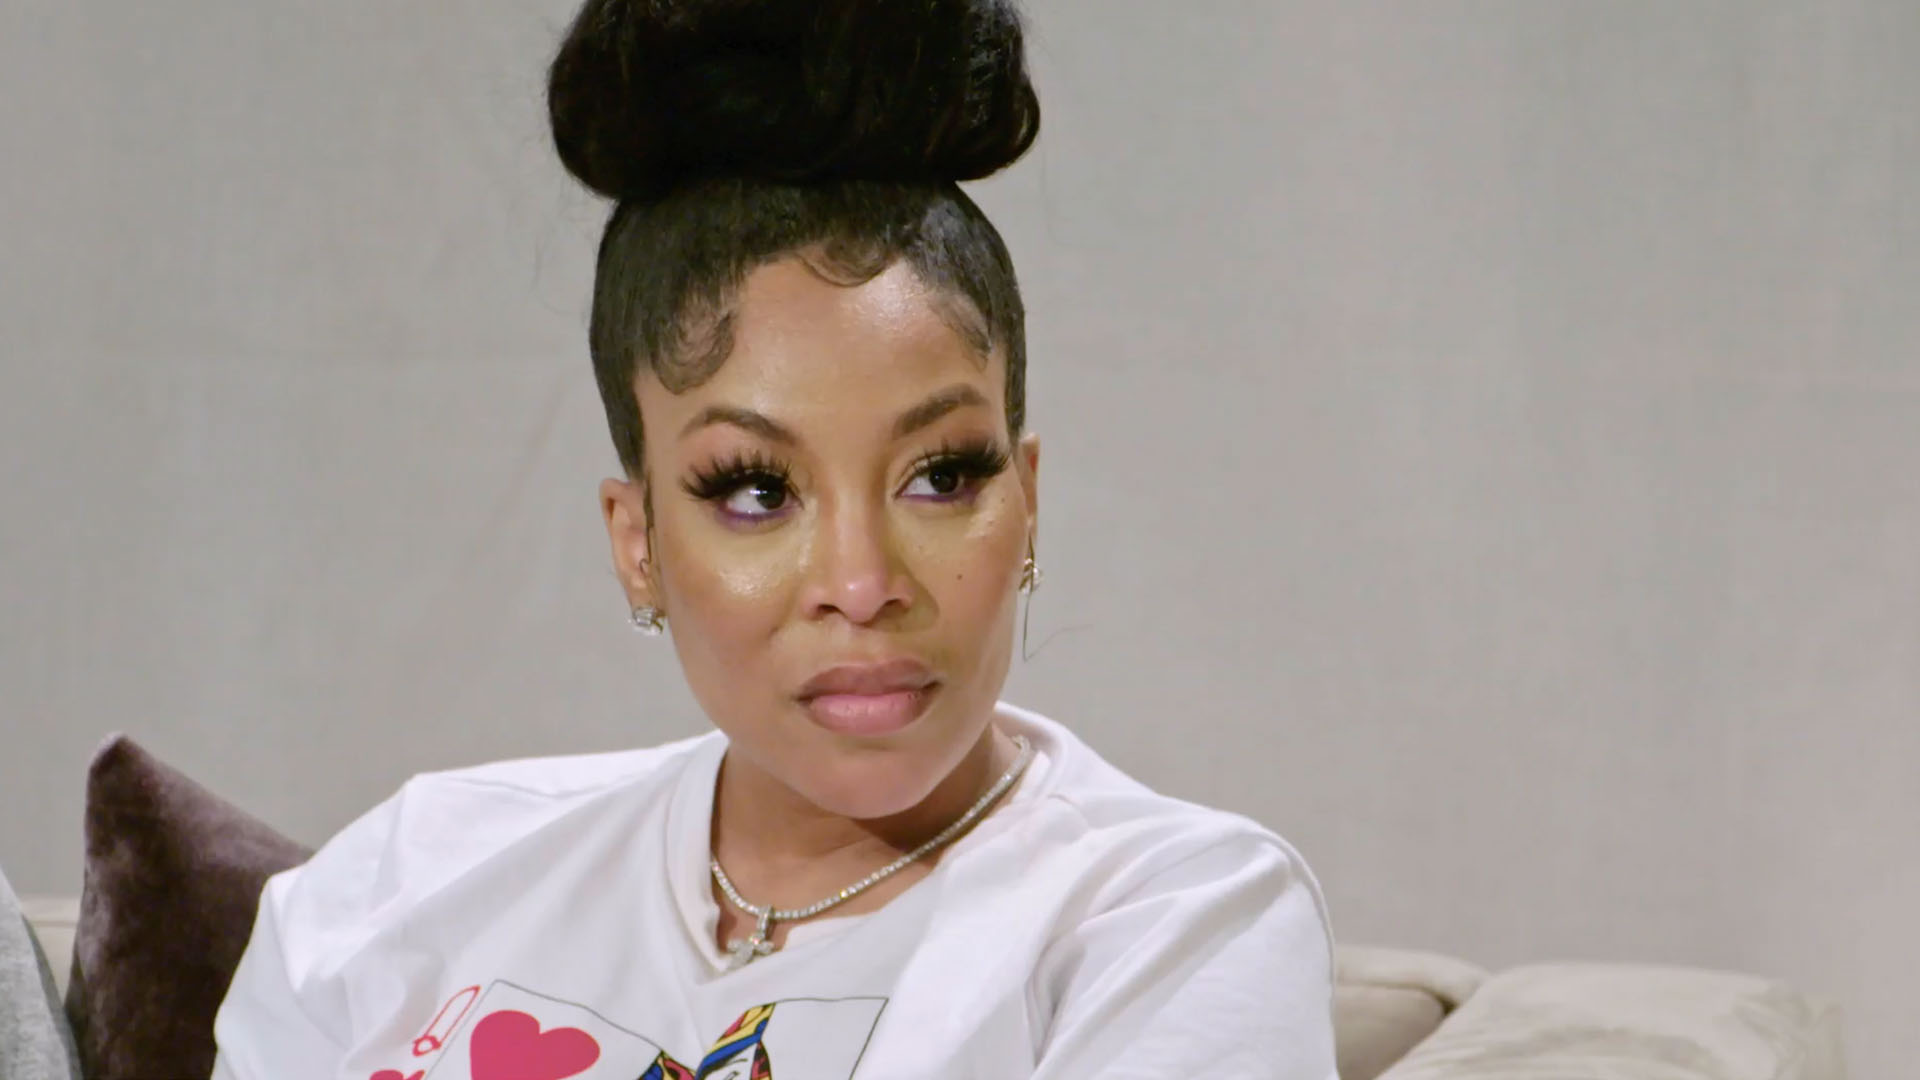 Watch Sneak Peek: K. Michelle & Lyrica Blow the Roof Off! | Marriage Boot Camp: Hip Hop Edition Video Extras